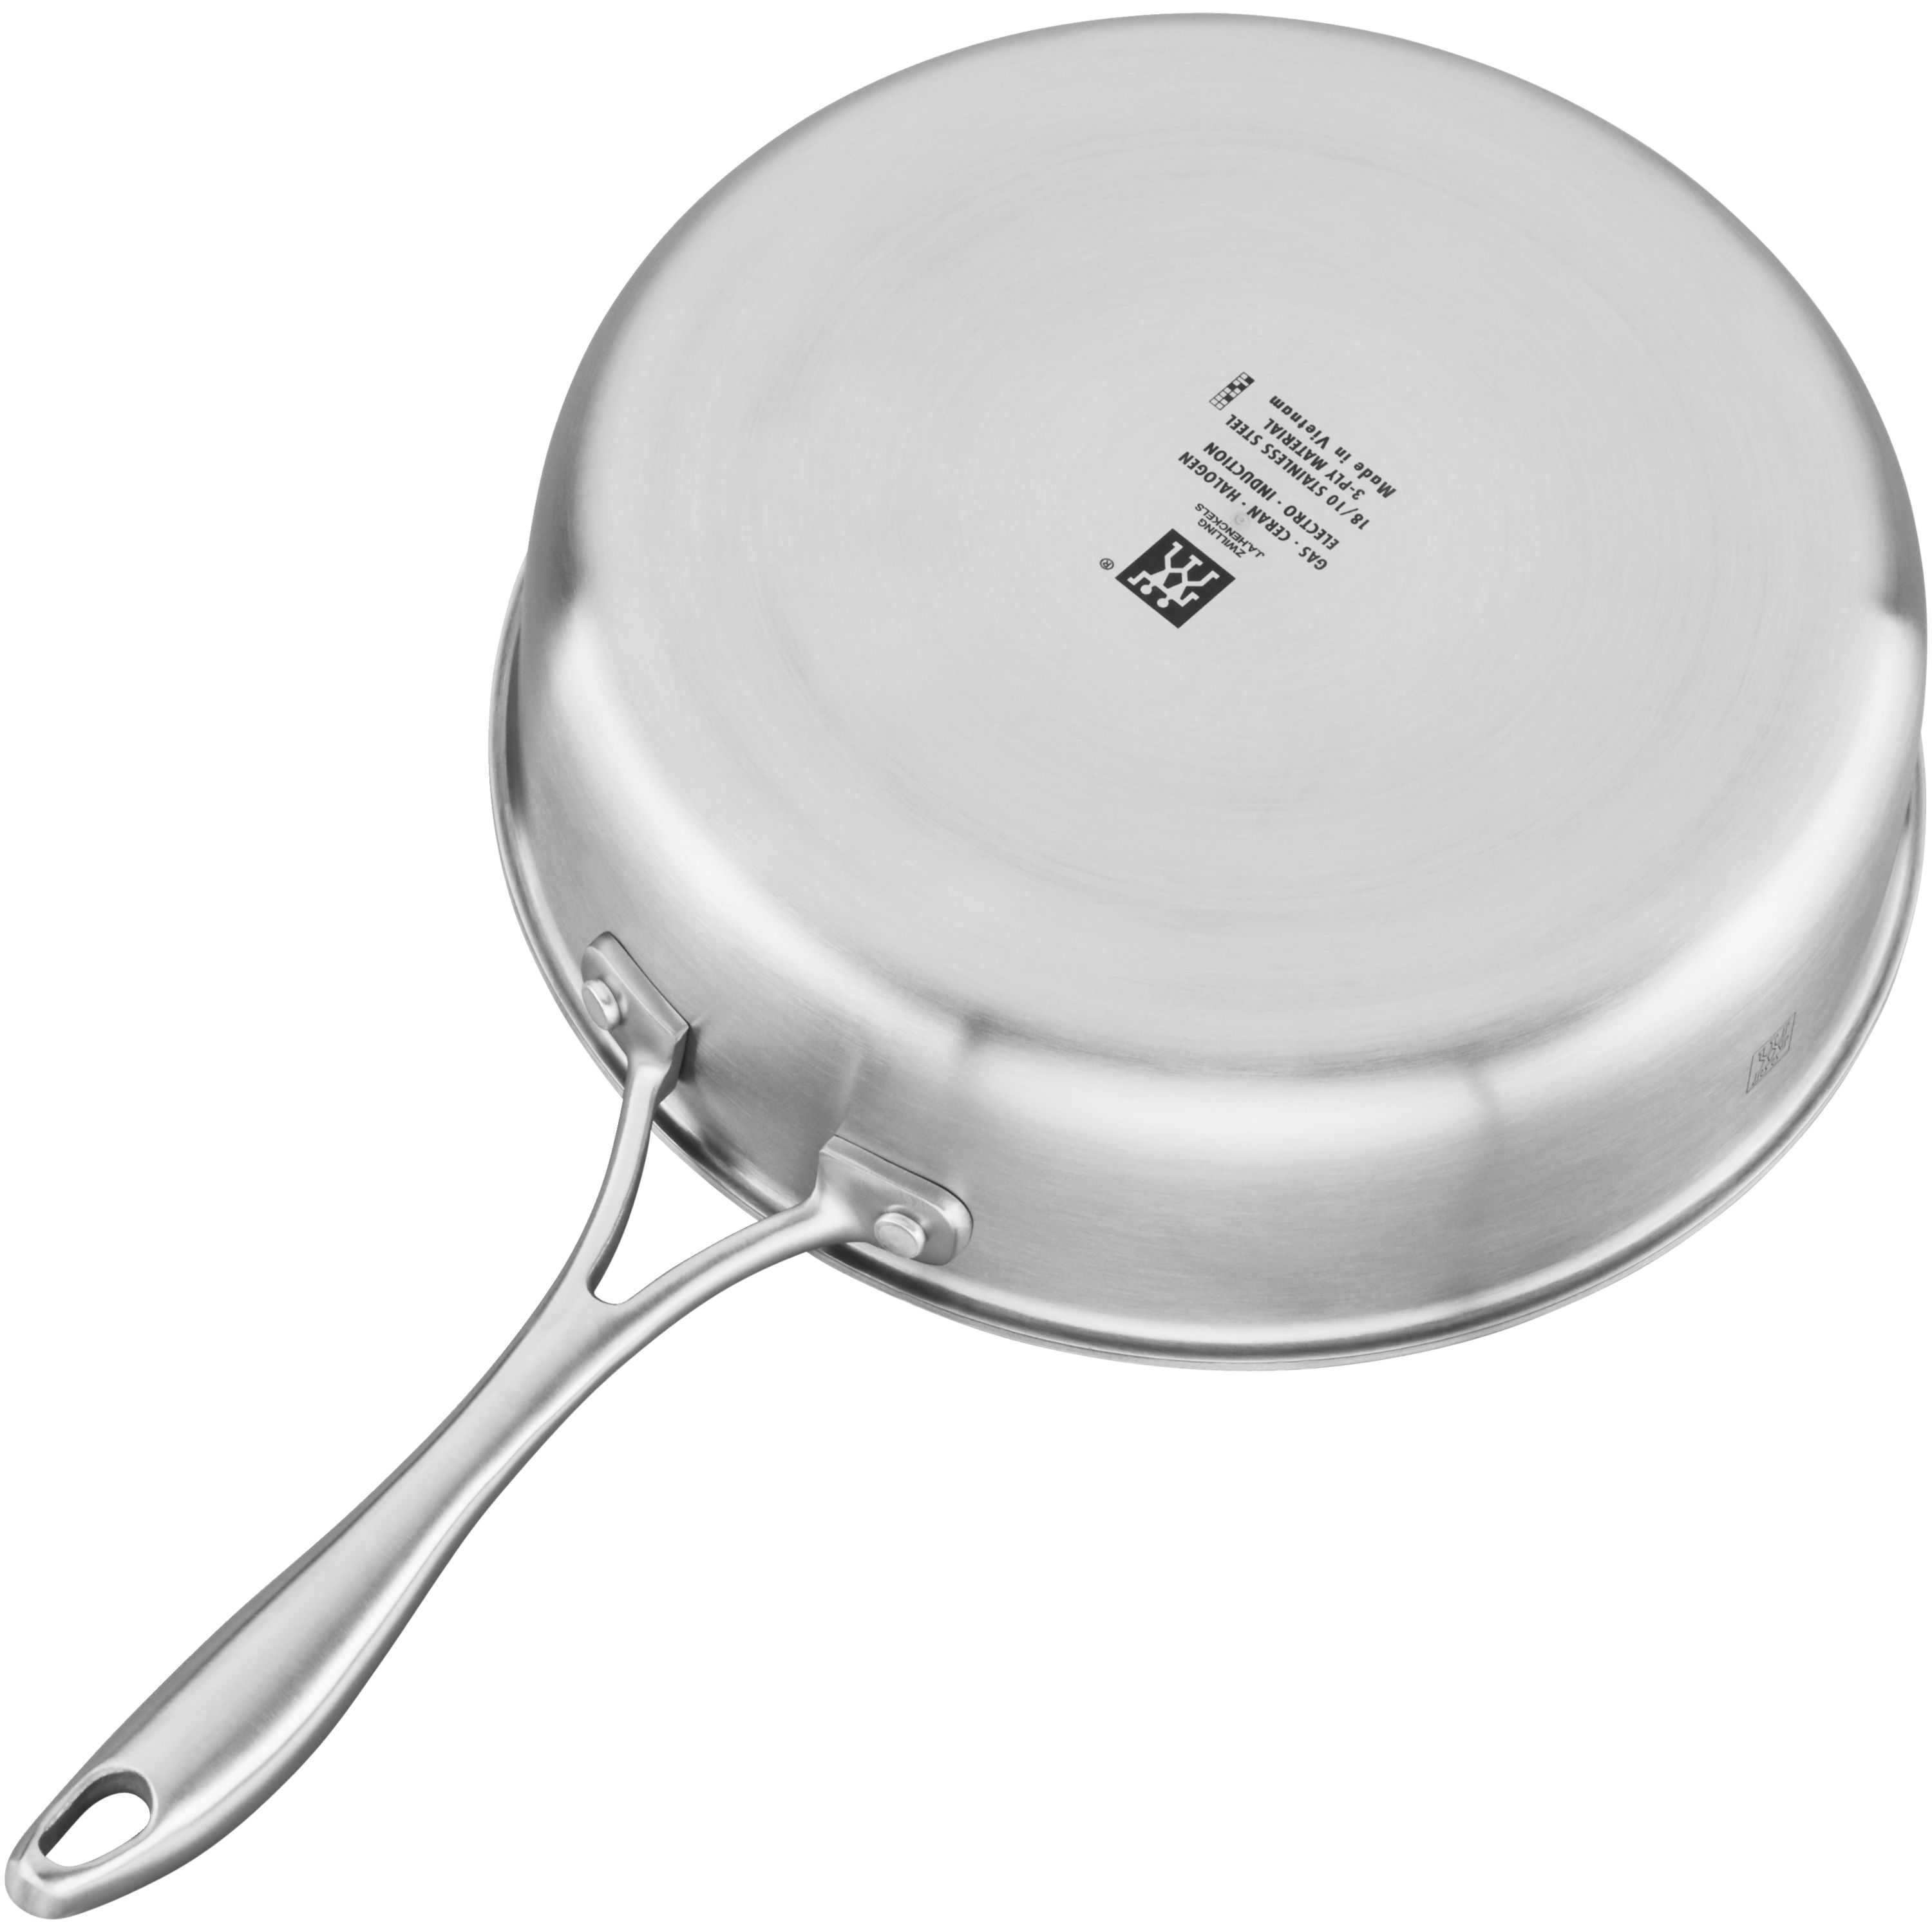 ZWILLING Spirit Ceramic Nonstick 9.5-inch, 18/10 Stainless Steel,  Non-stick, FRYING PAN WITH GLASS LID